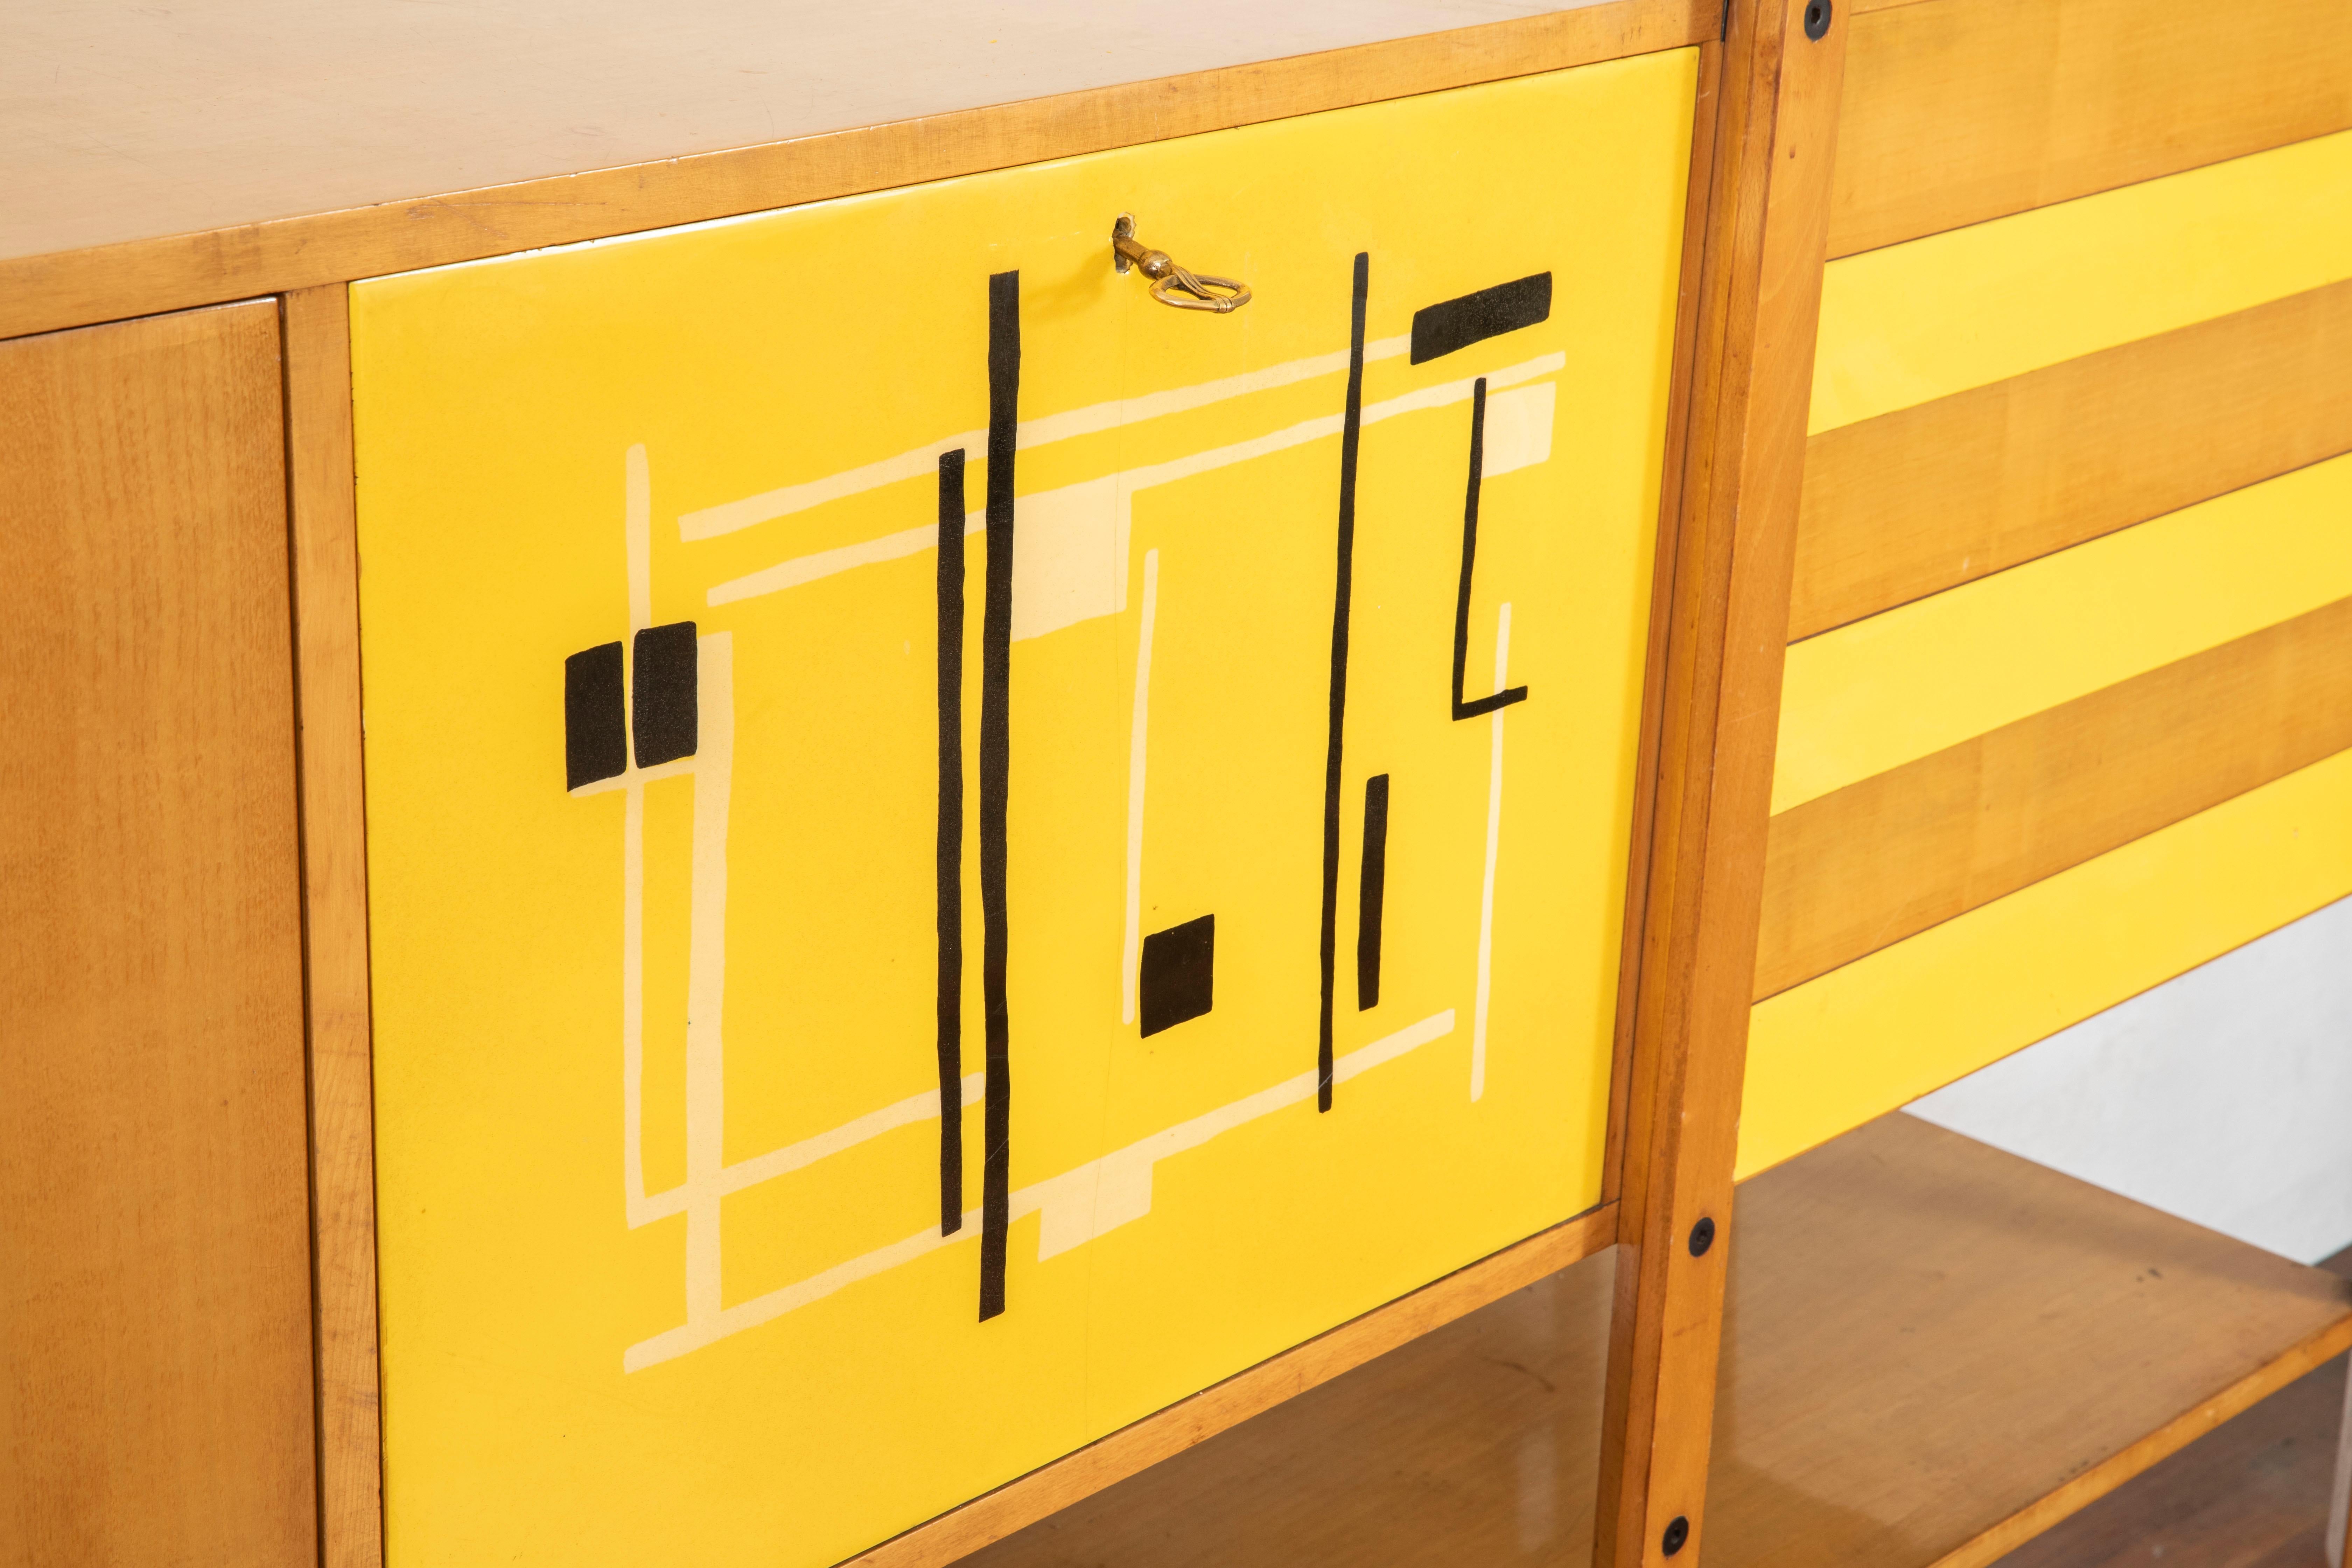 Very rare oakwood credenza designed by Roberto Aloi circa 1955, enameled steel, abstract black and yellow pattern printed plastic and glass.

Two doors conceal, two adjustable shelves and three drawers storage compartment.